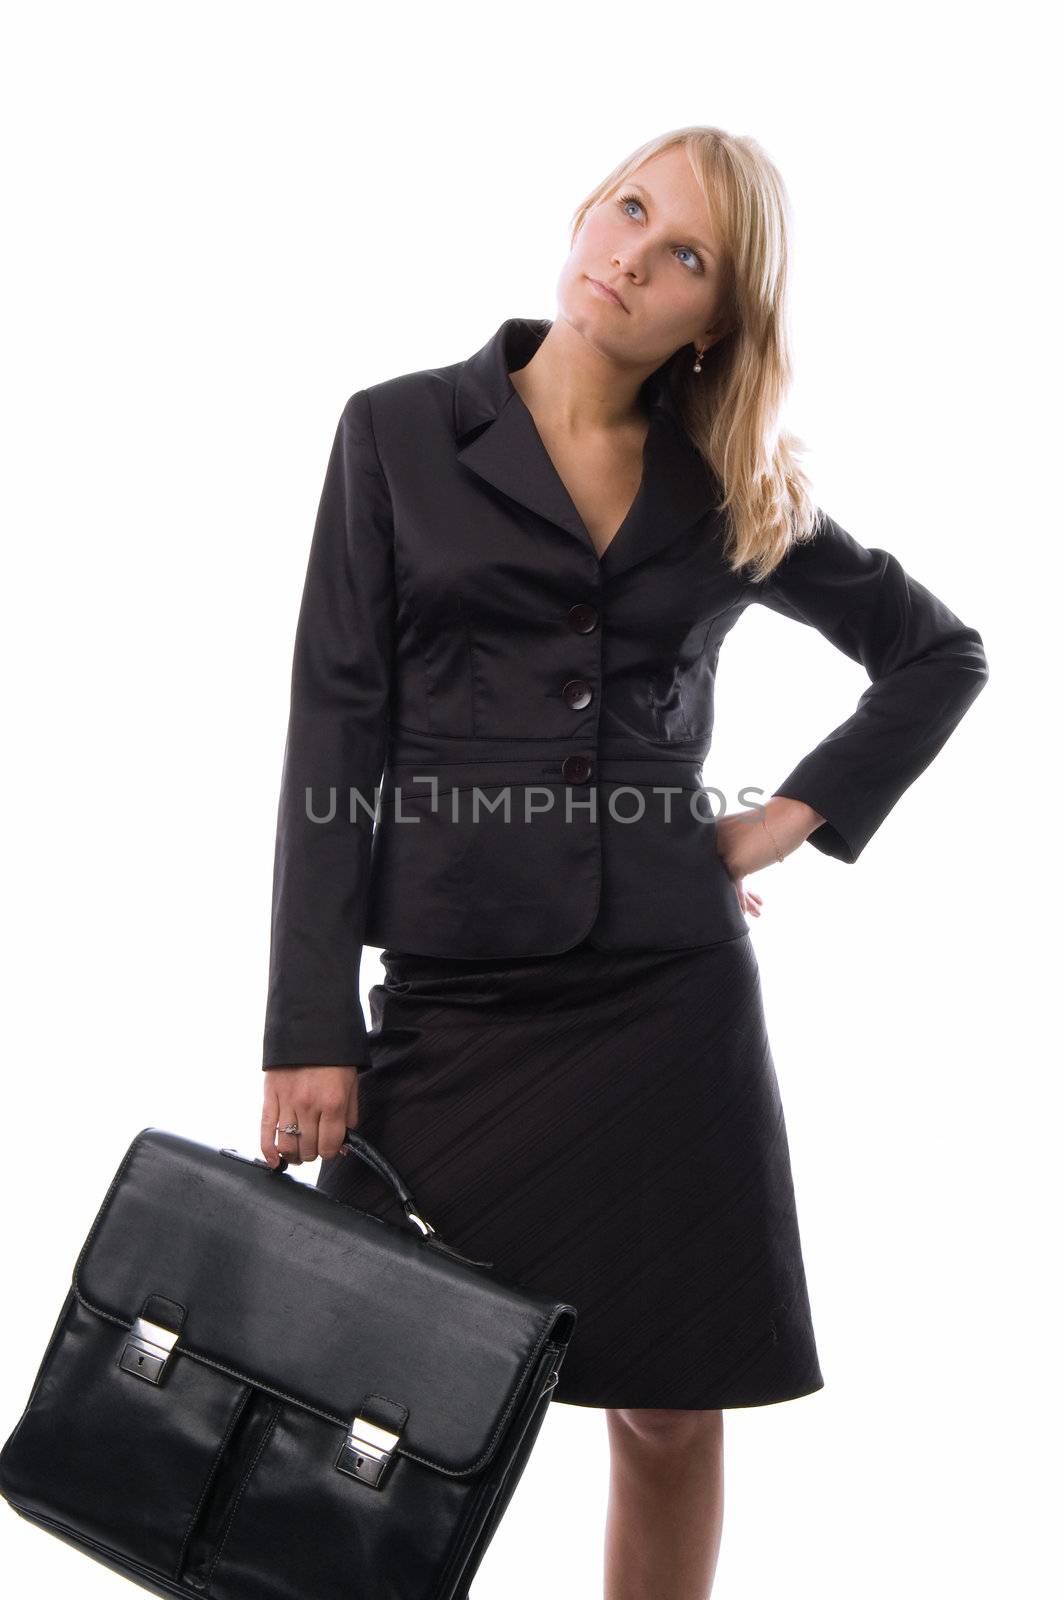 The businesswoman with a portfolio by andyphoto